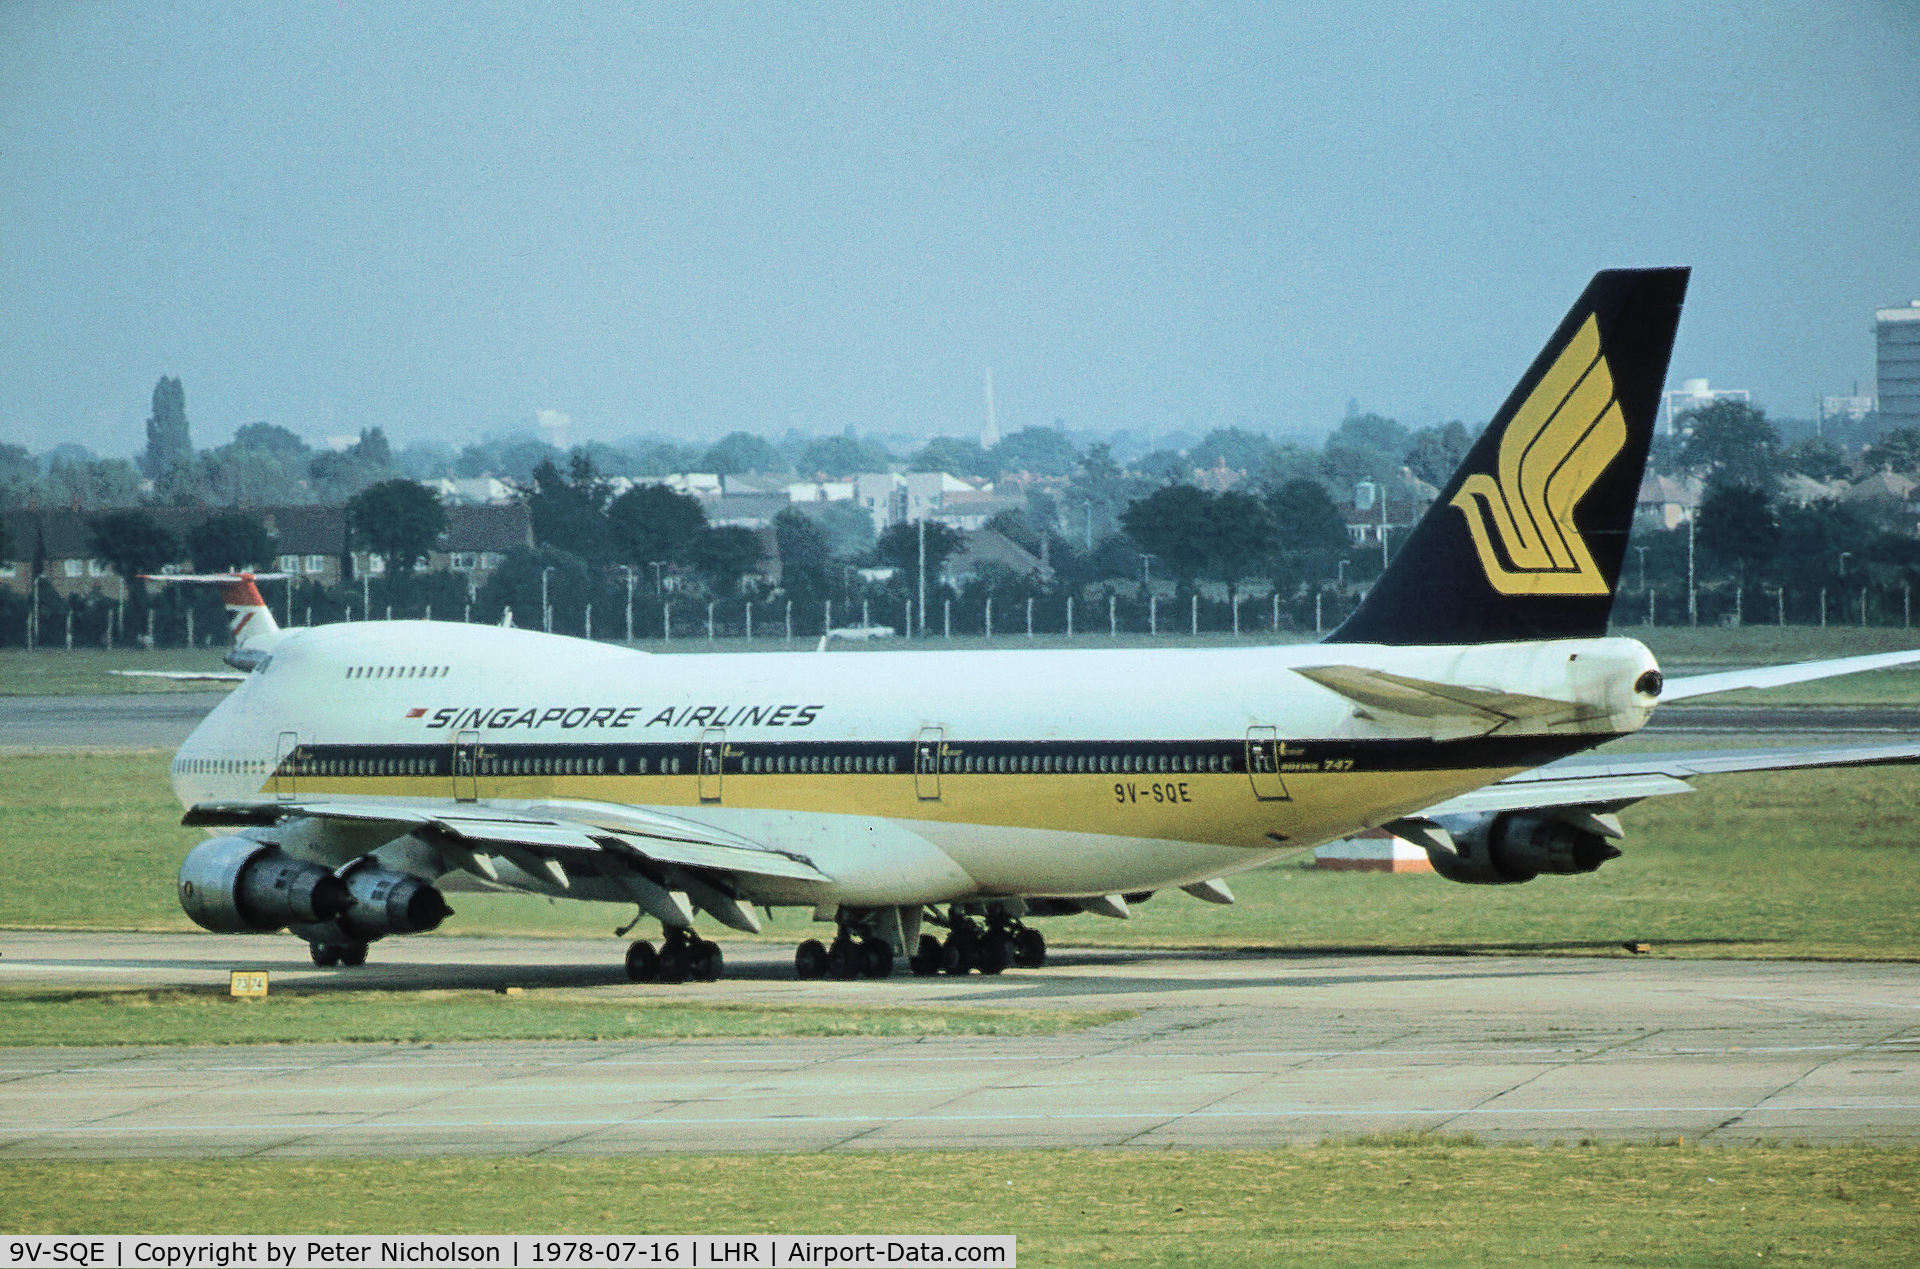 9V-SQE, 1976 Boeing 747-212B C/N 21162, Boeing 747-212B of Singapore Airlines taxying to the active runway at Heathrow in the Summer of 1978.